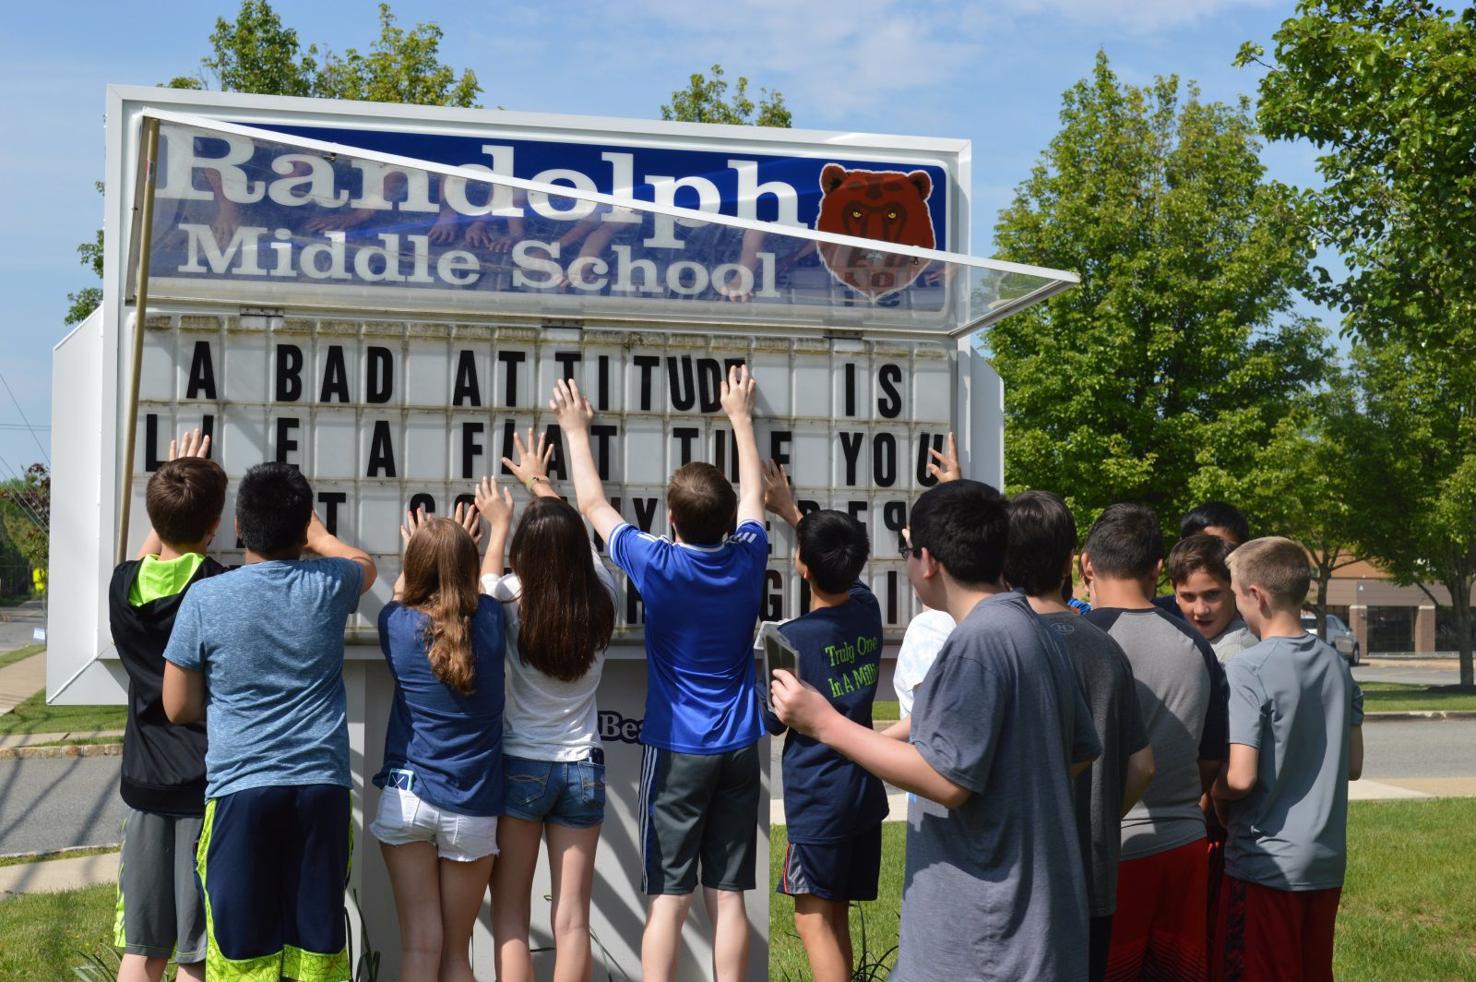 Randolph Middle School students allowed to change sign Randolph